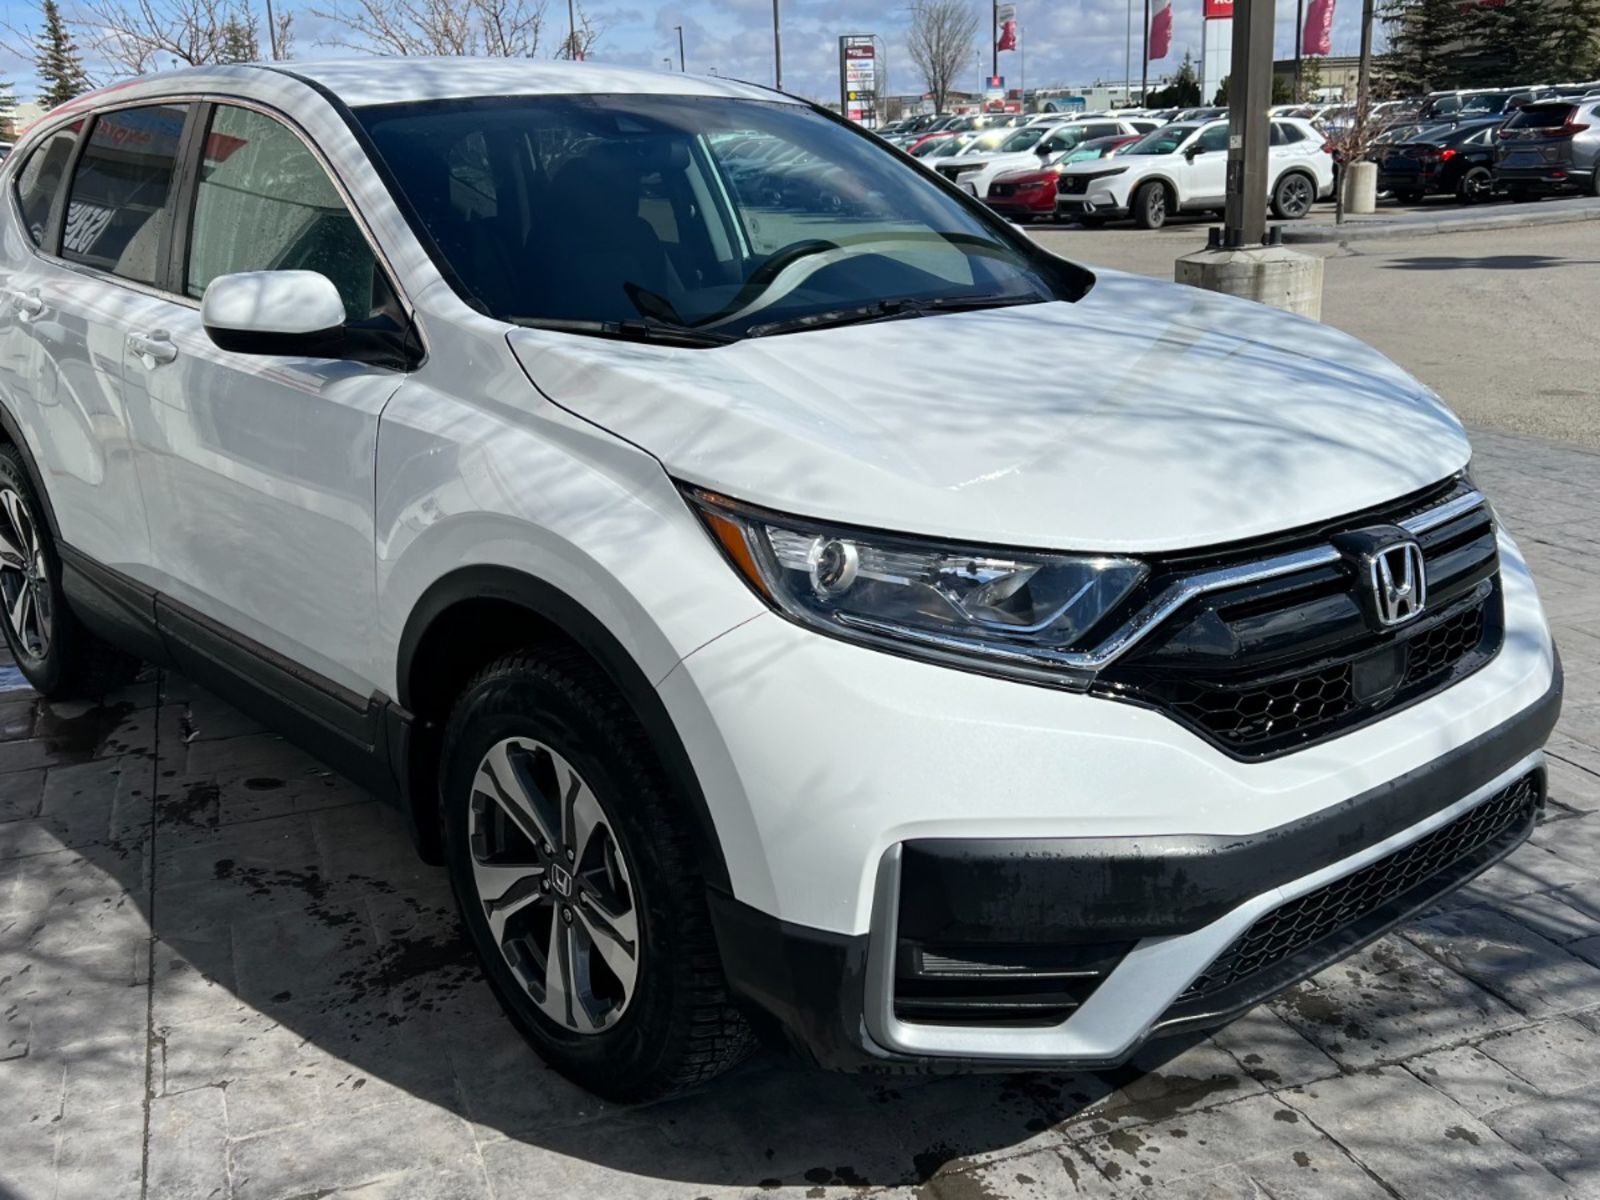 2022 Honda CR-V LX - One Owner, No Accidents, Heated Seats